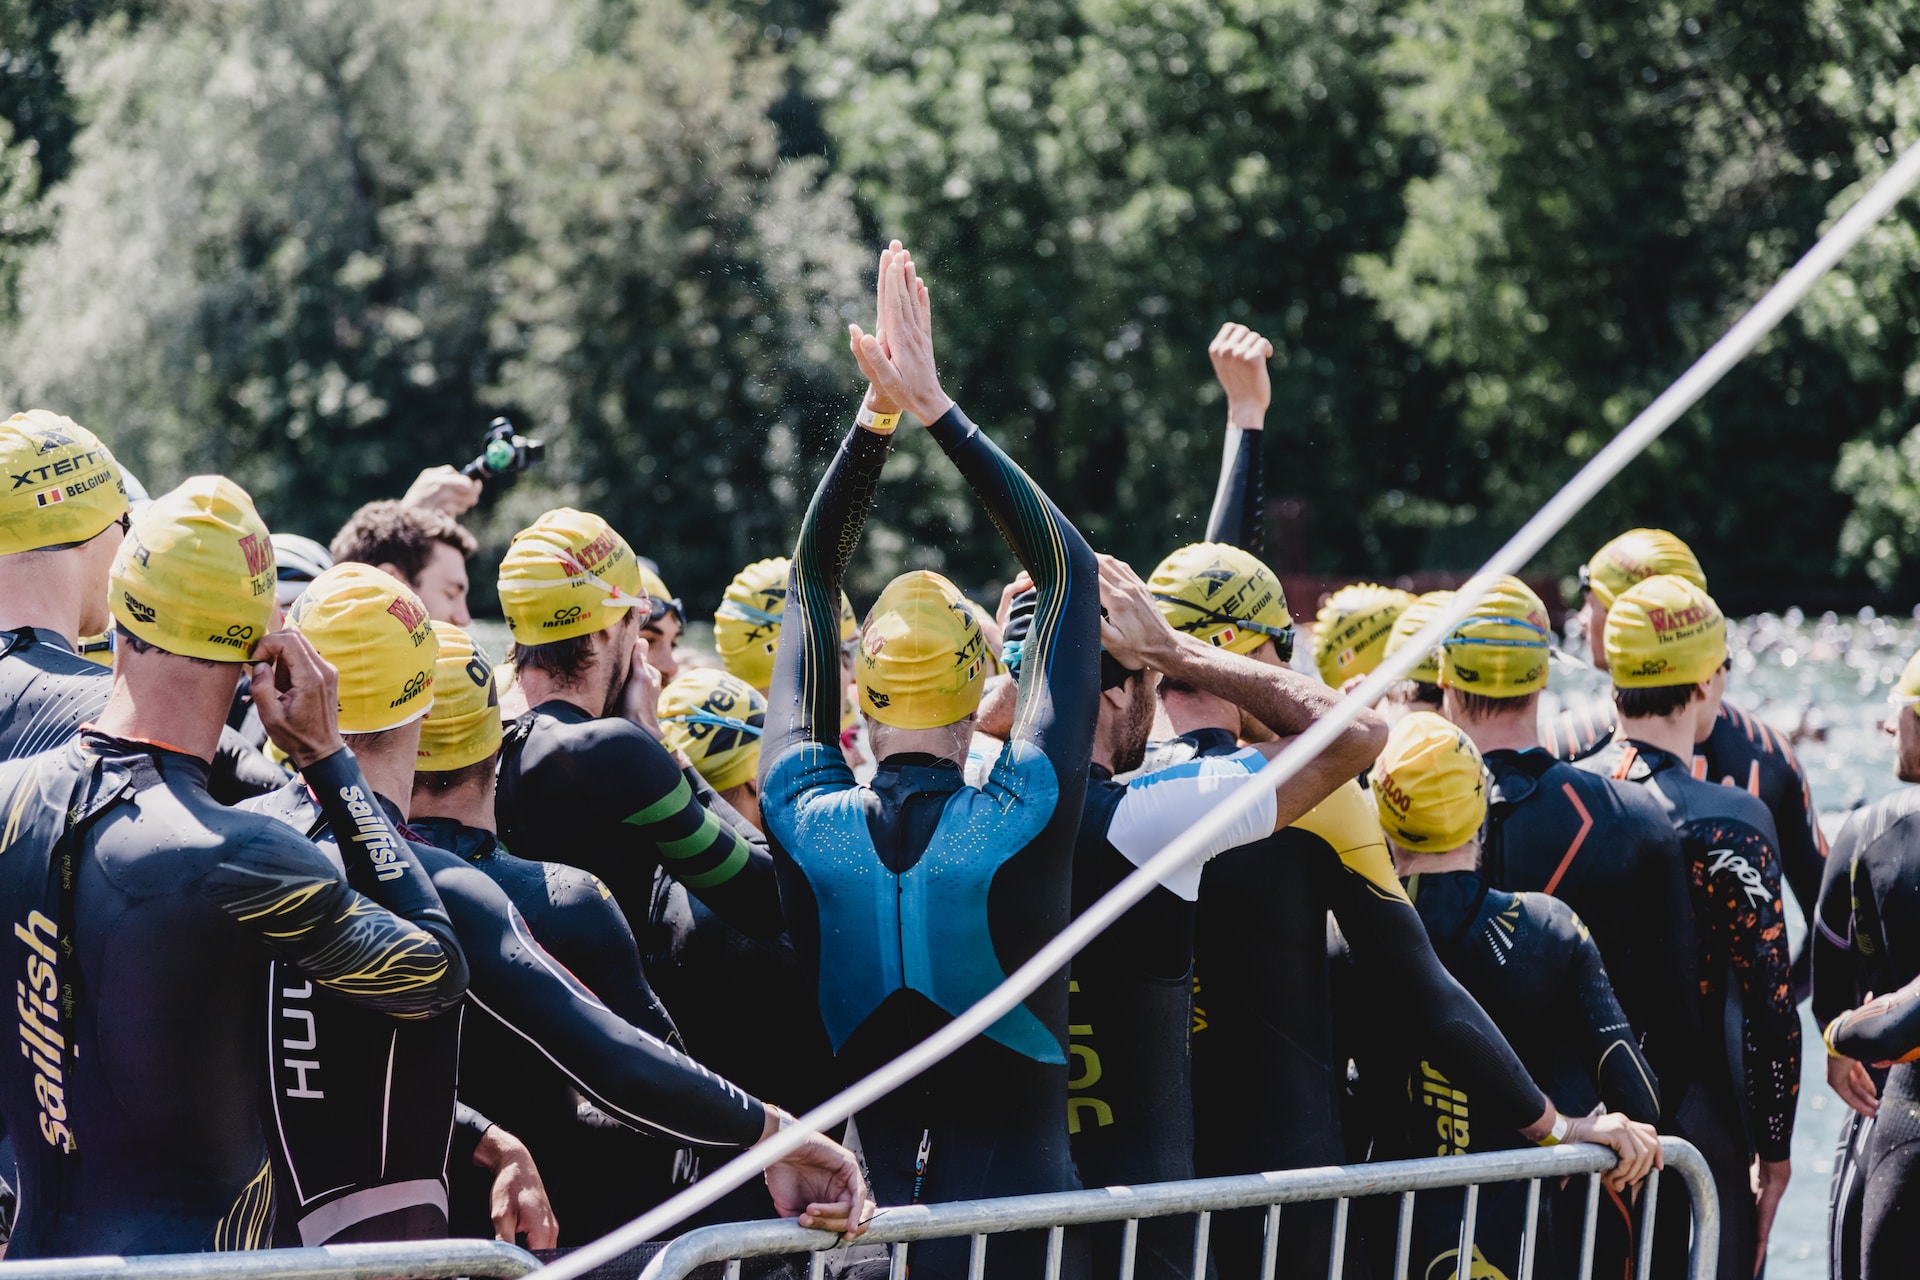 this image shows the team of athletes getting ready to the triathlon competition